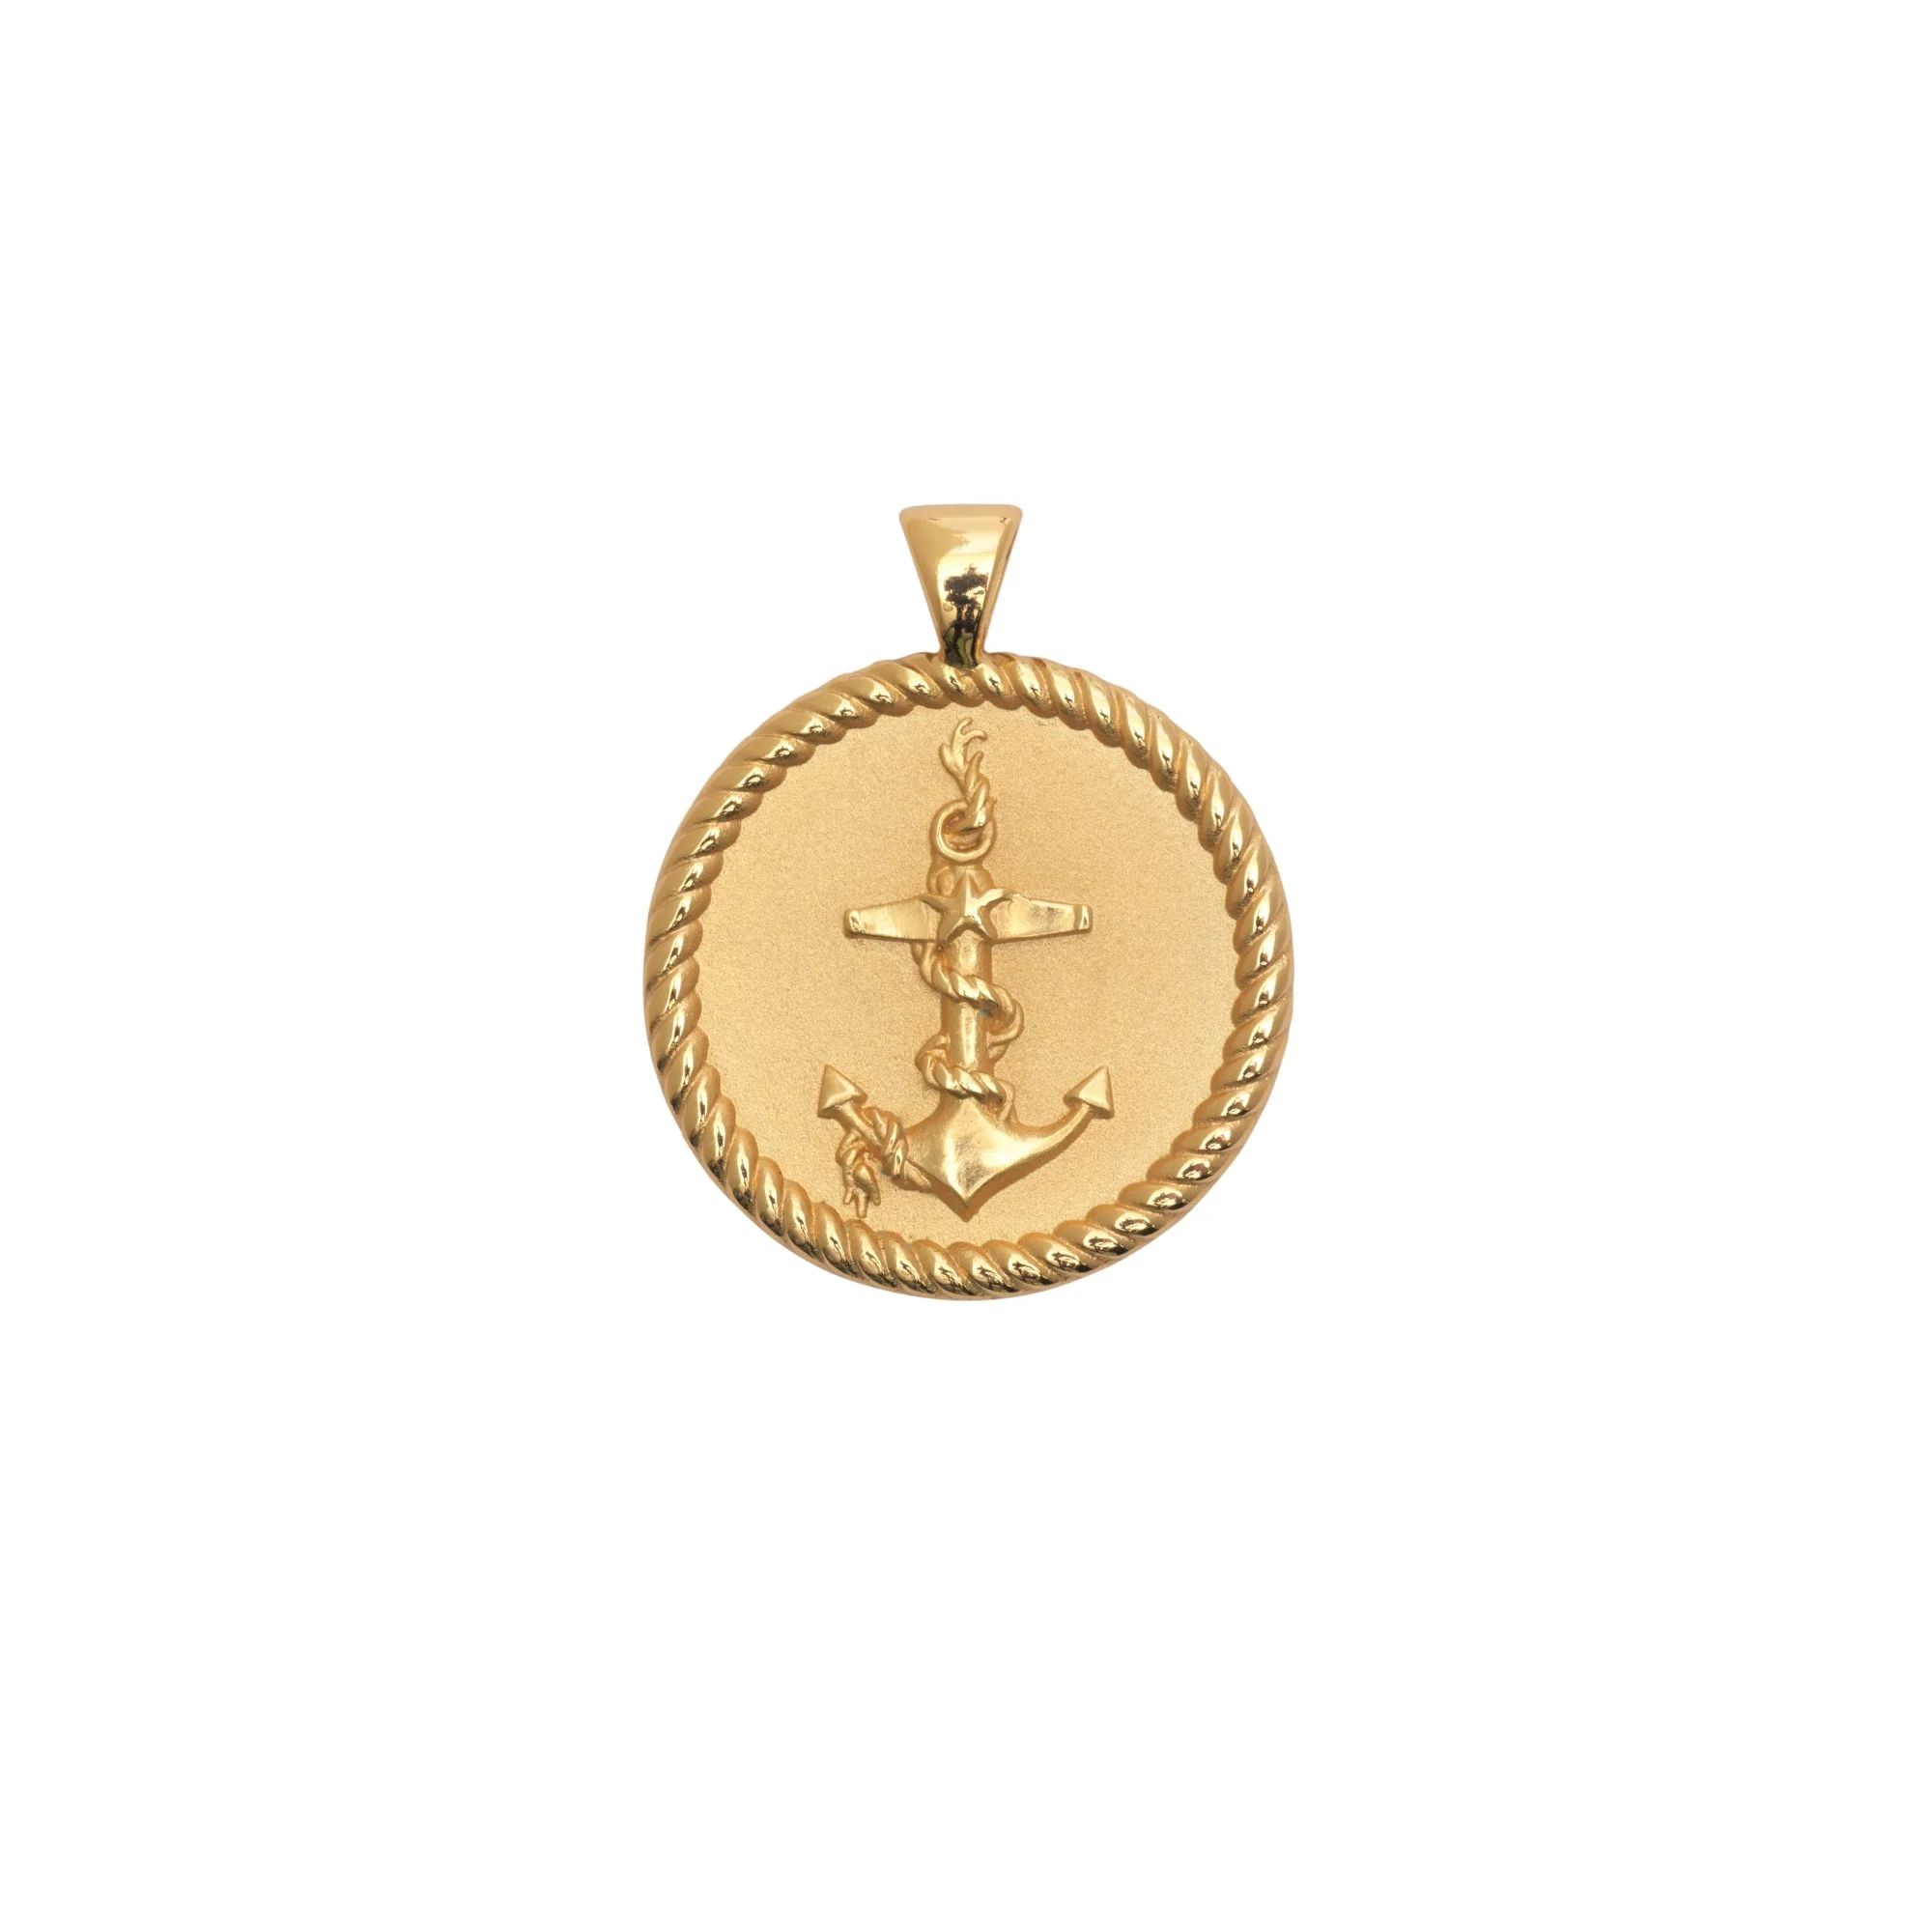 STRONG JW Small Pendant Coin | Jane Win